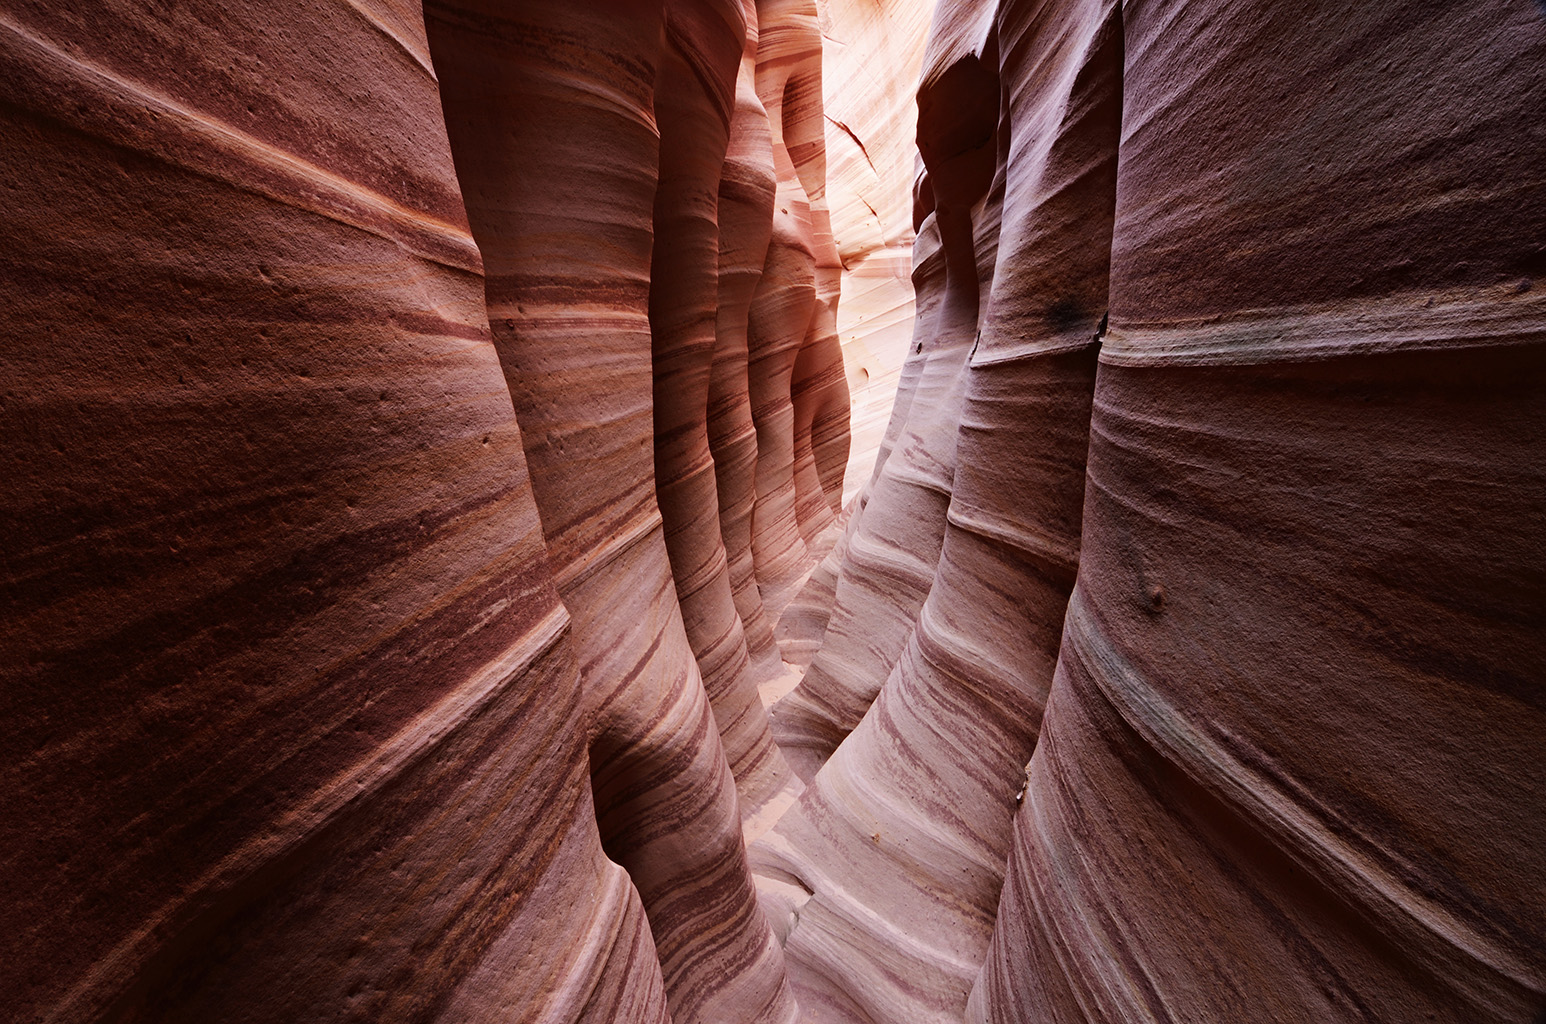 Zebra Canyon near the town of Escalante, Utah, on May 31st, 2011